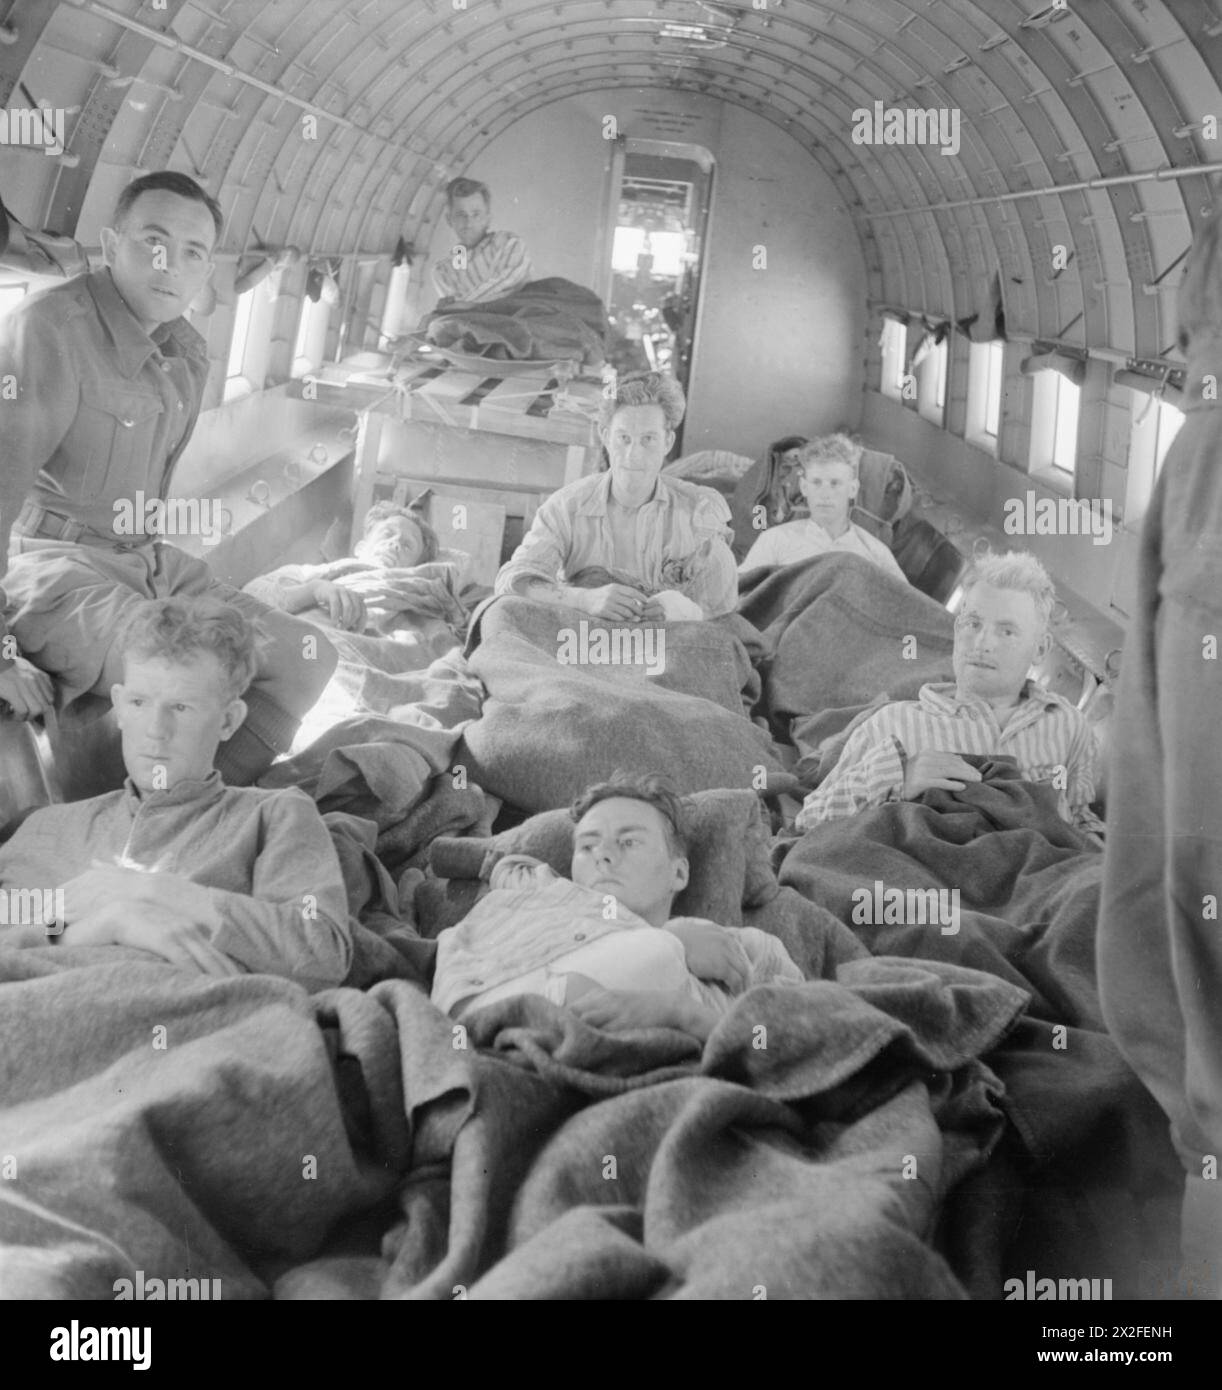 ROYAL AIR FORCE OPERATIONS IN THE MIDDLE EAST AND NORTH AFRICA, 1939-1943. - Battle casualties loaded into a Lockheed Hudson Mark VI of No. 216 Group RAF at Castel Benito, Libya, for evacuation to hospitals in Egypt Royal Air Force, Group, 216 (Air Transport and Ferry) Stock Photo